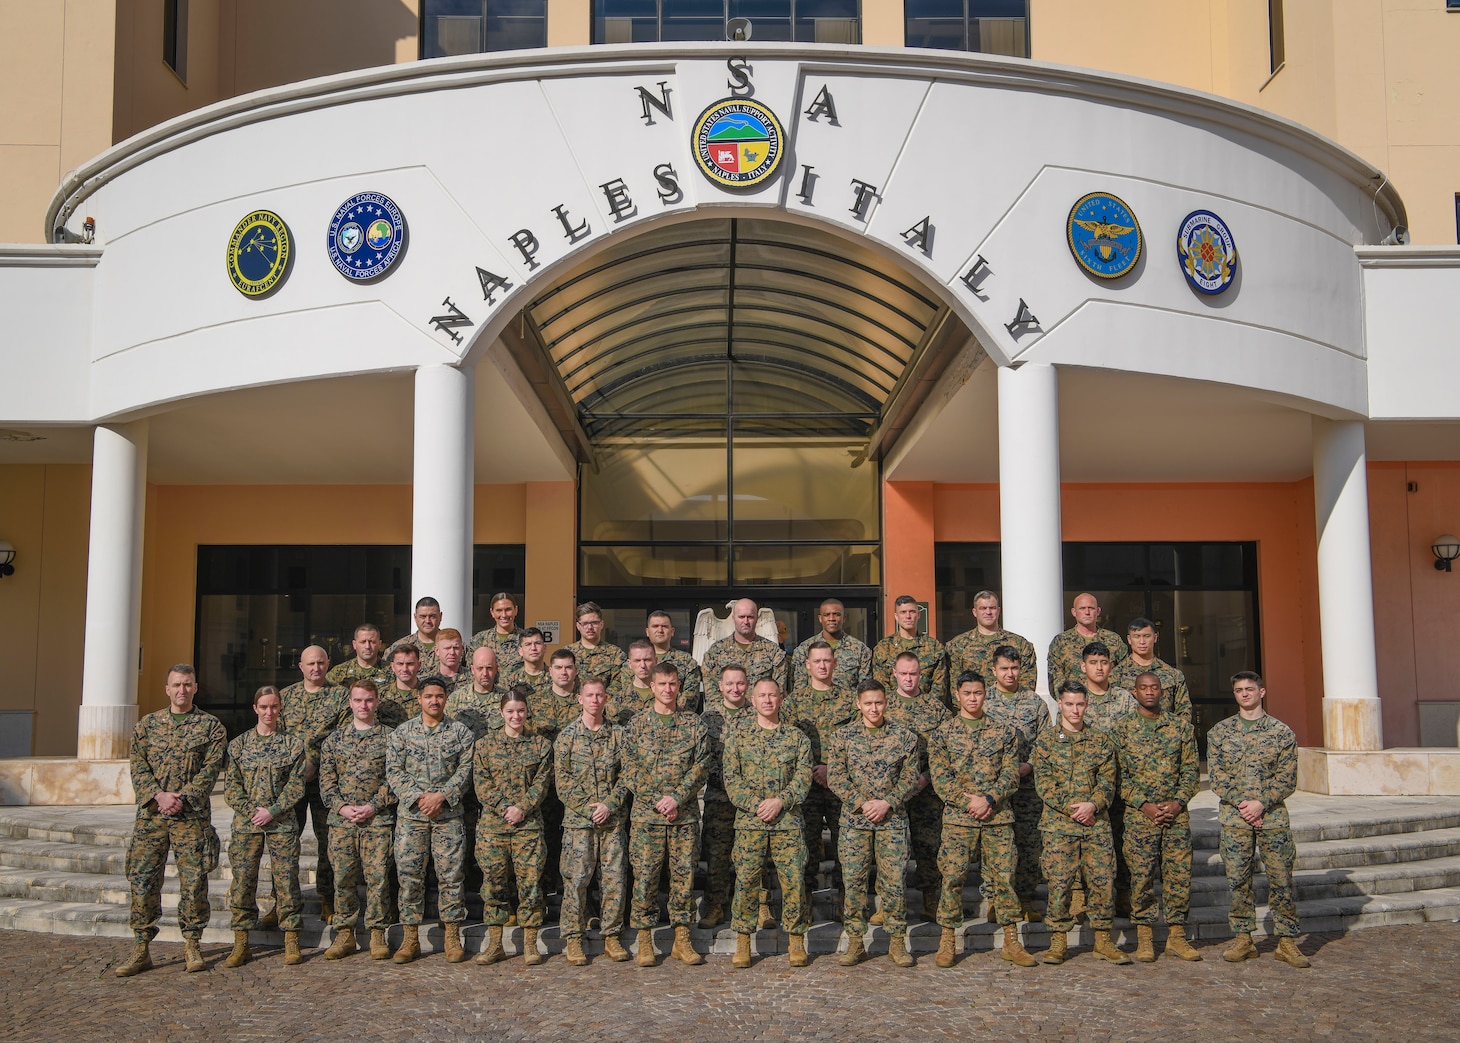 U.S. Marines assigned to Task Force 61 pose for a group photo at Naval Support Activity, Naples, Italy, Jan. 27, 2023.